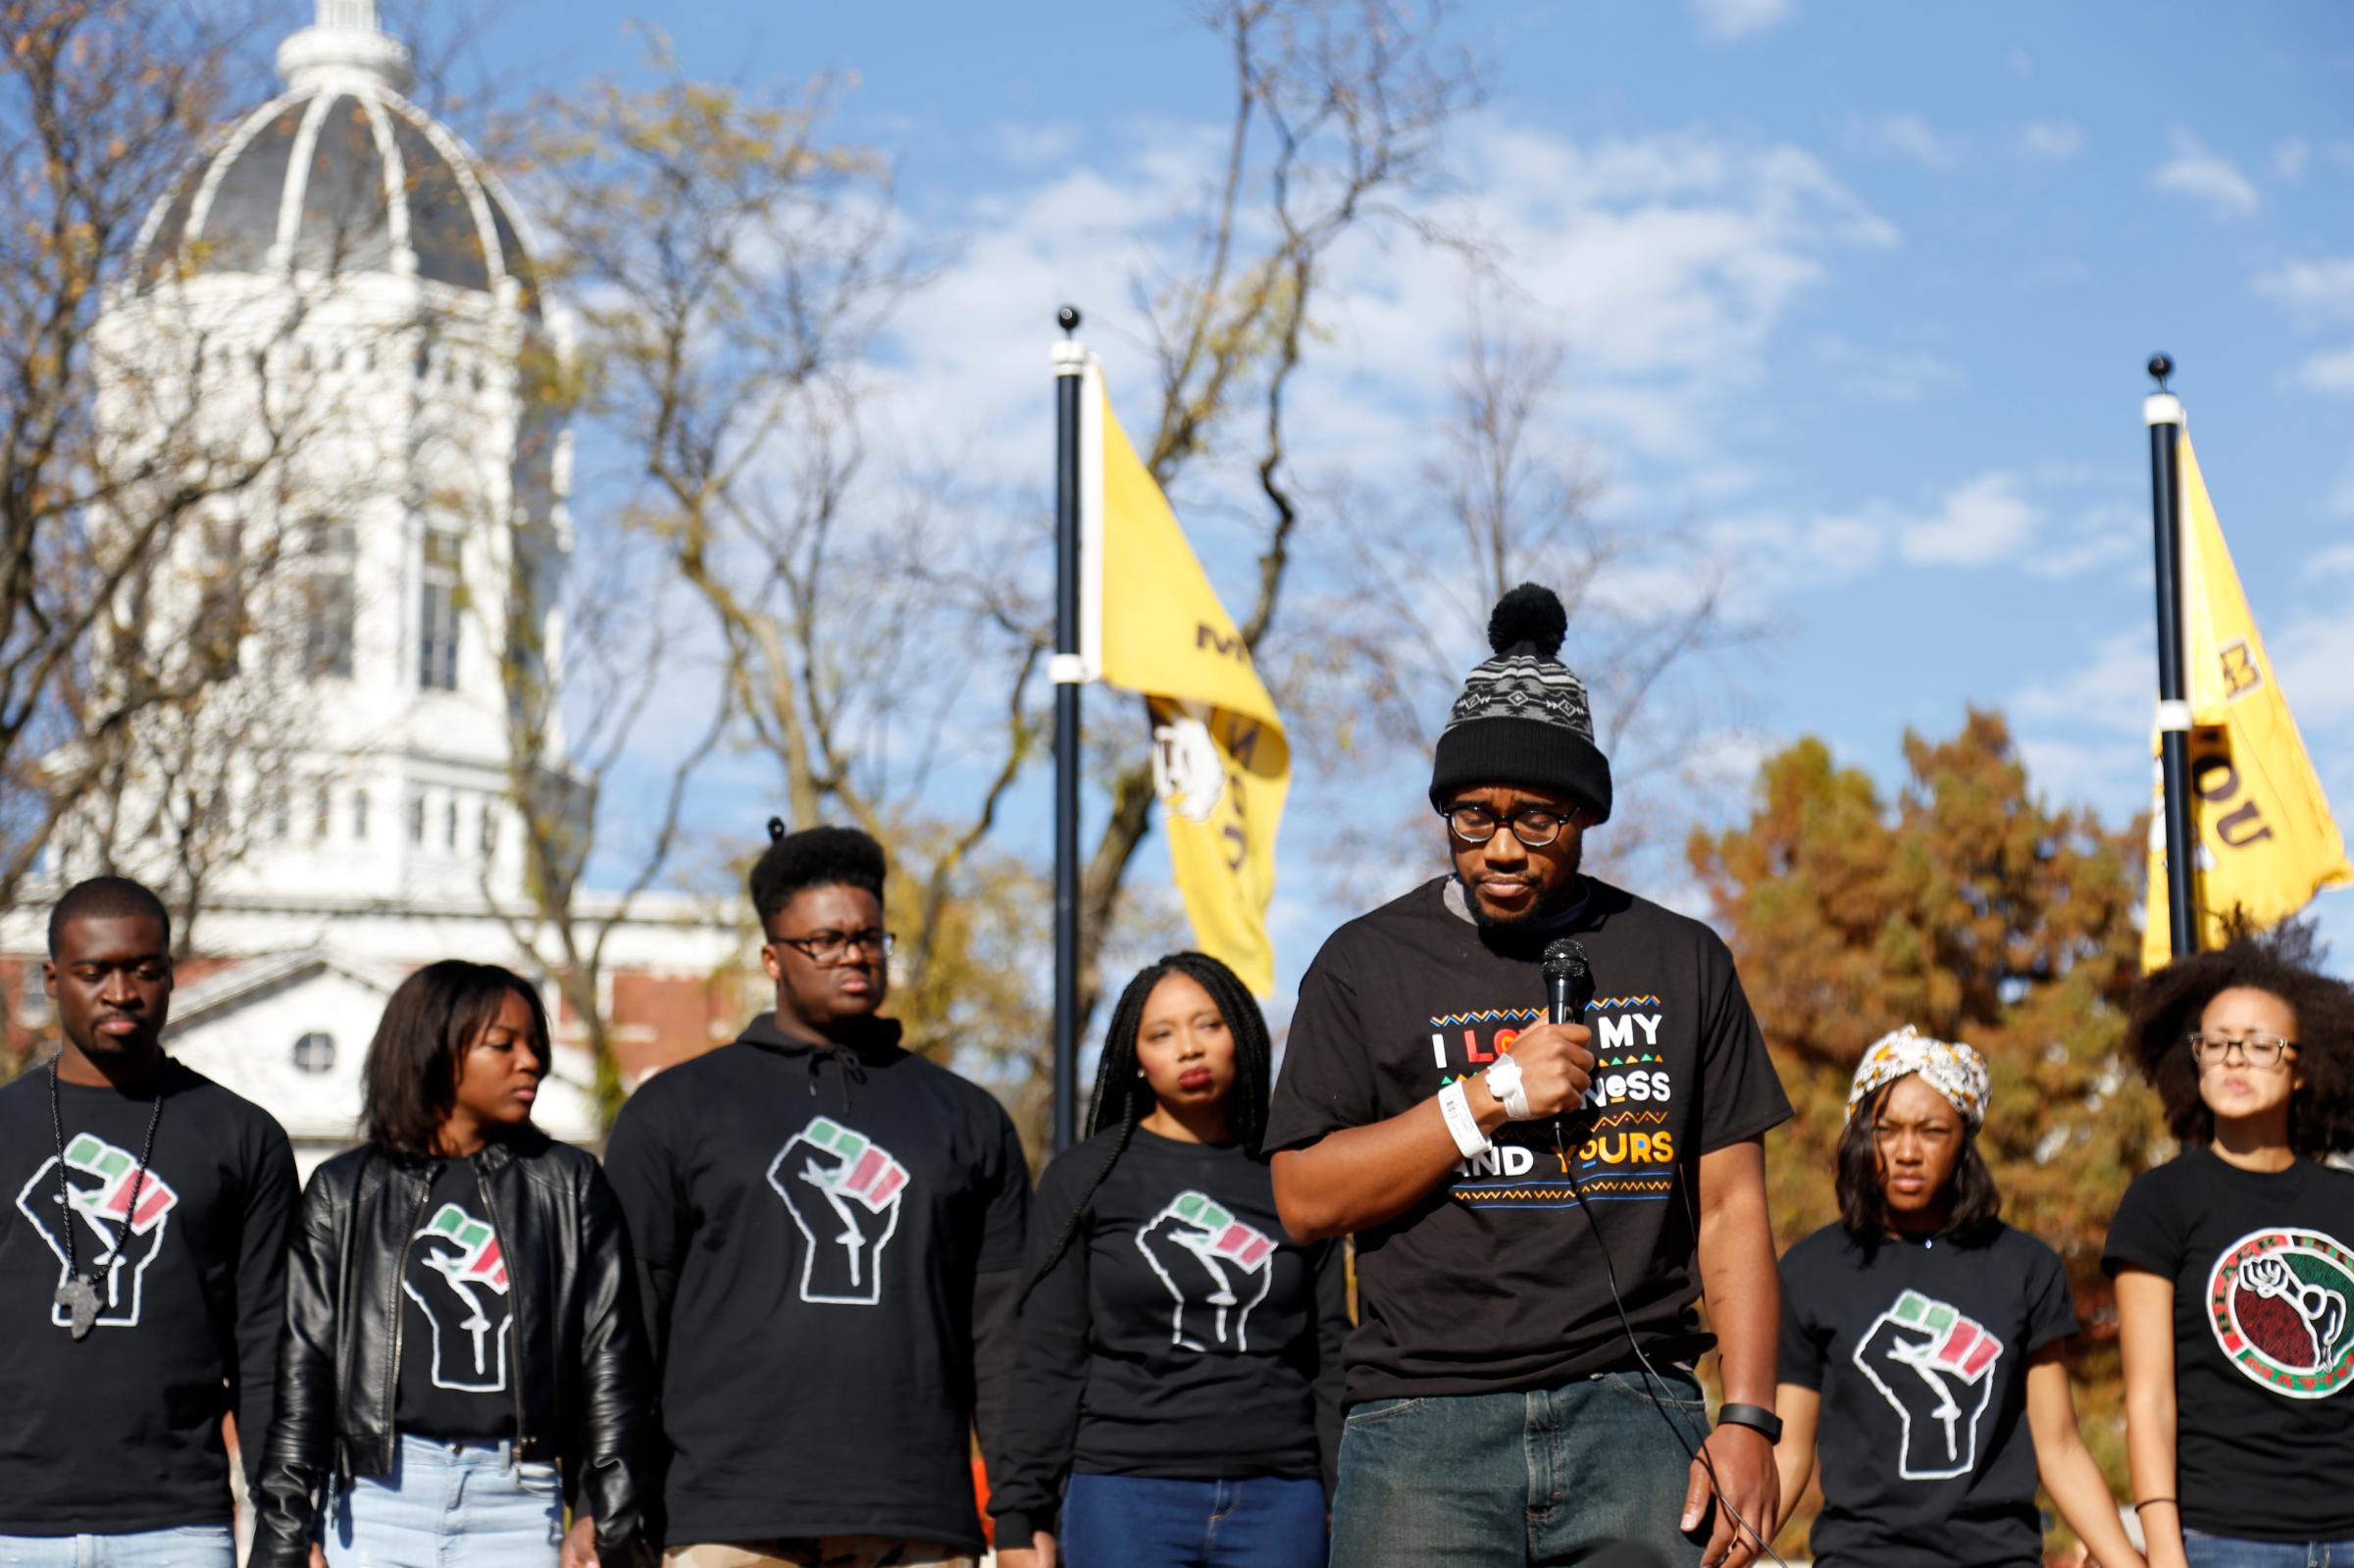 Concerned Student 1950 members holds a news conference after Tim Wolfe resigned as president from University of Missouri on Nov. 9, 2015. Jonthan Butler, at microphone, ended his hunger strike upon Wolfe's resignation.